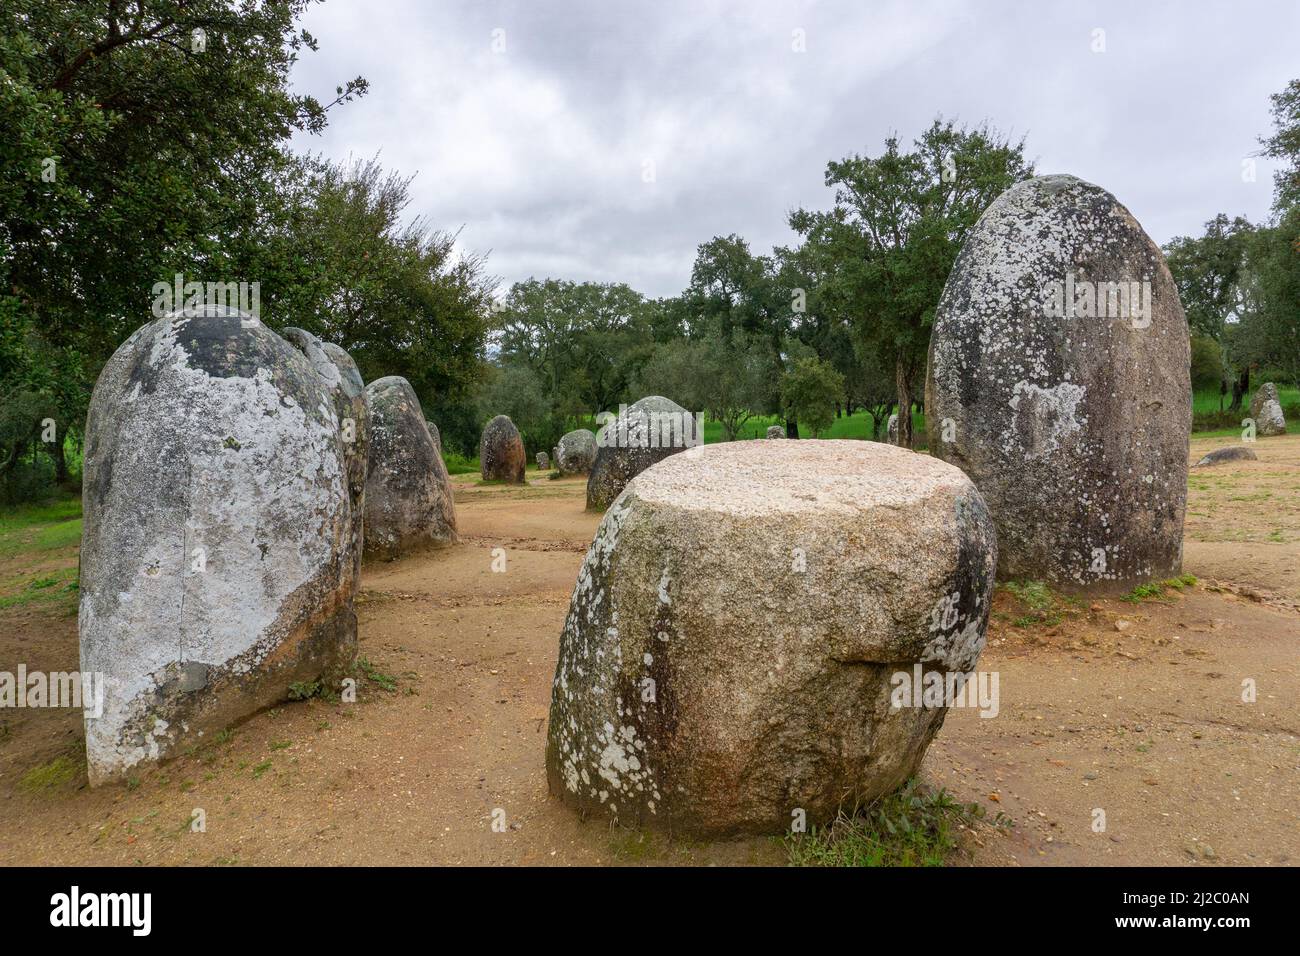 A view of the Cromlech of the Almendres megalithic complex in the Alentejo region of Portugal Stock Photo